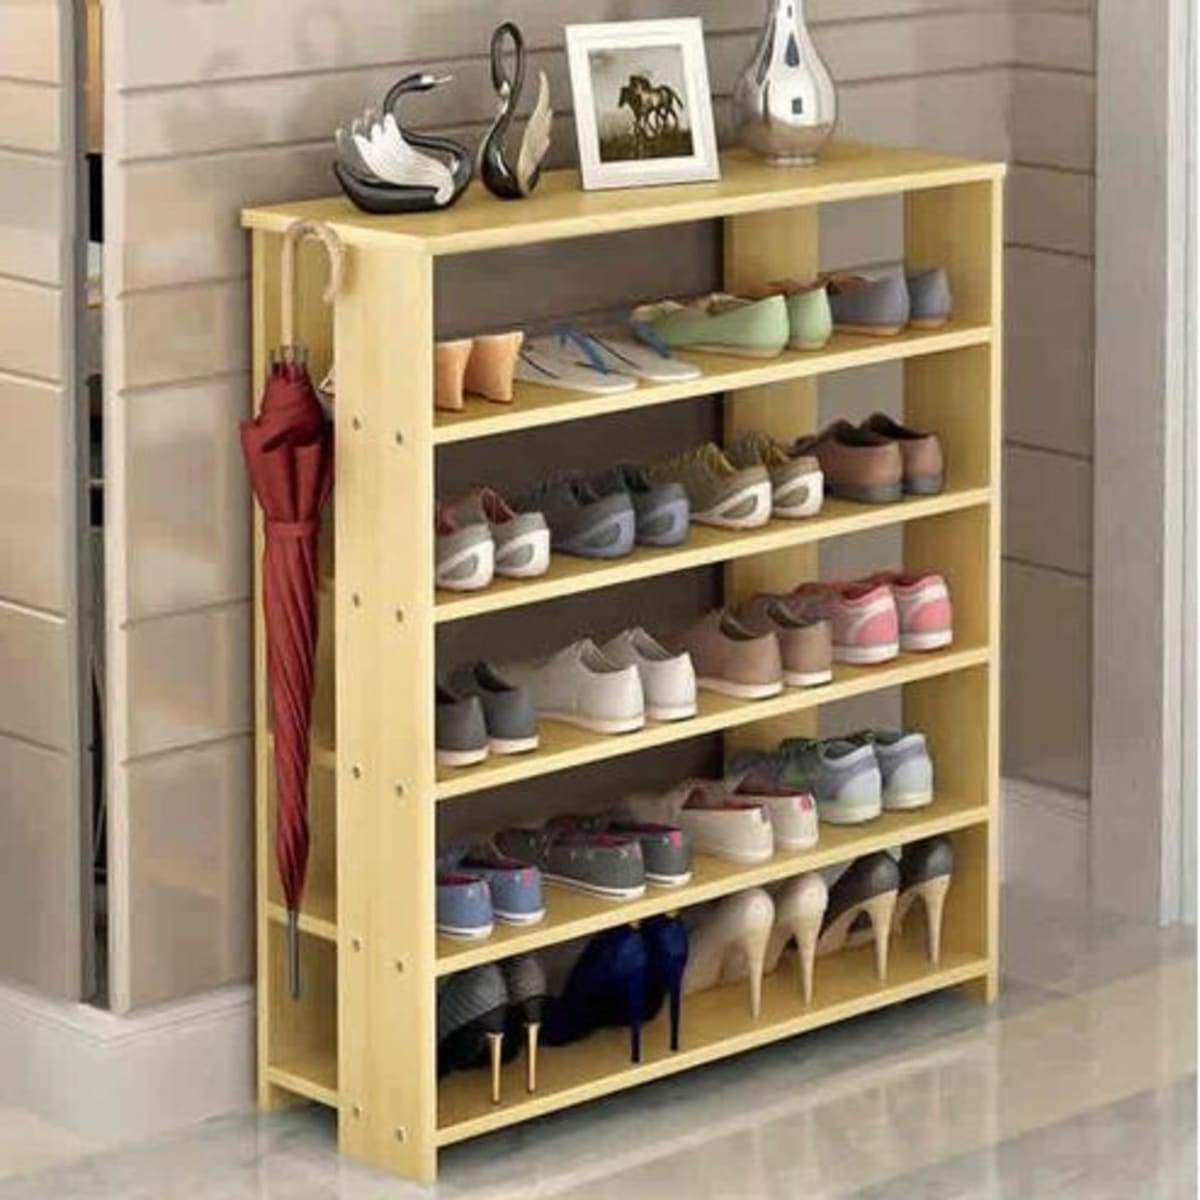 Relaxdays Shoe Rack, 2 Shelves, for 6 Pairs, Bamboo & Birch Wood, 33 x 70 x  26 cm, Footwear Storage, Natural/White